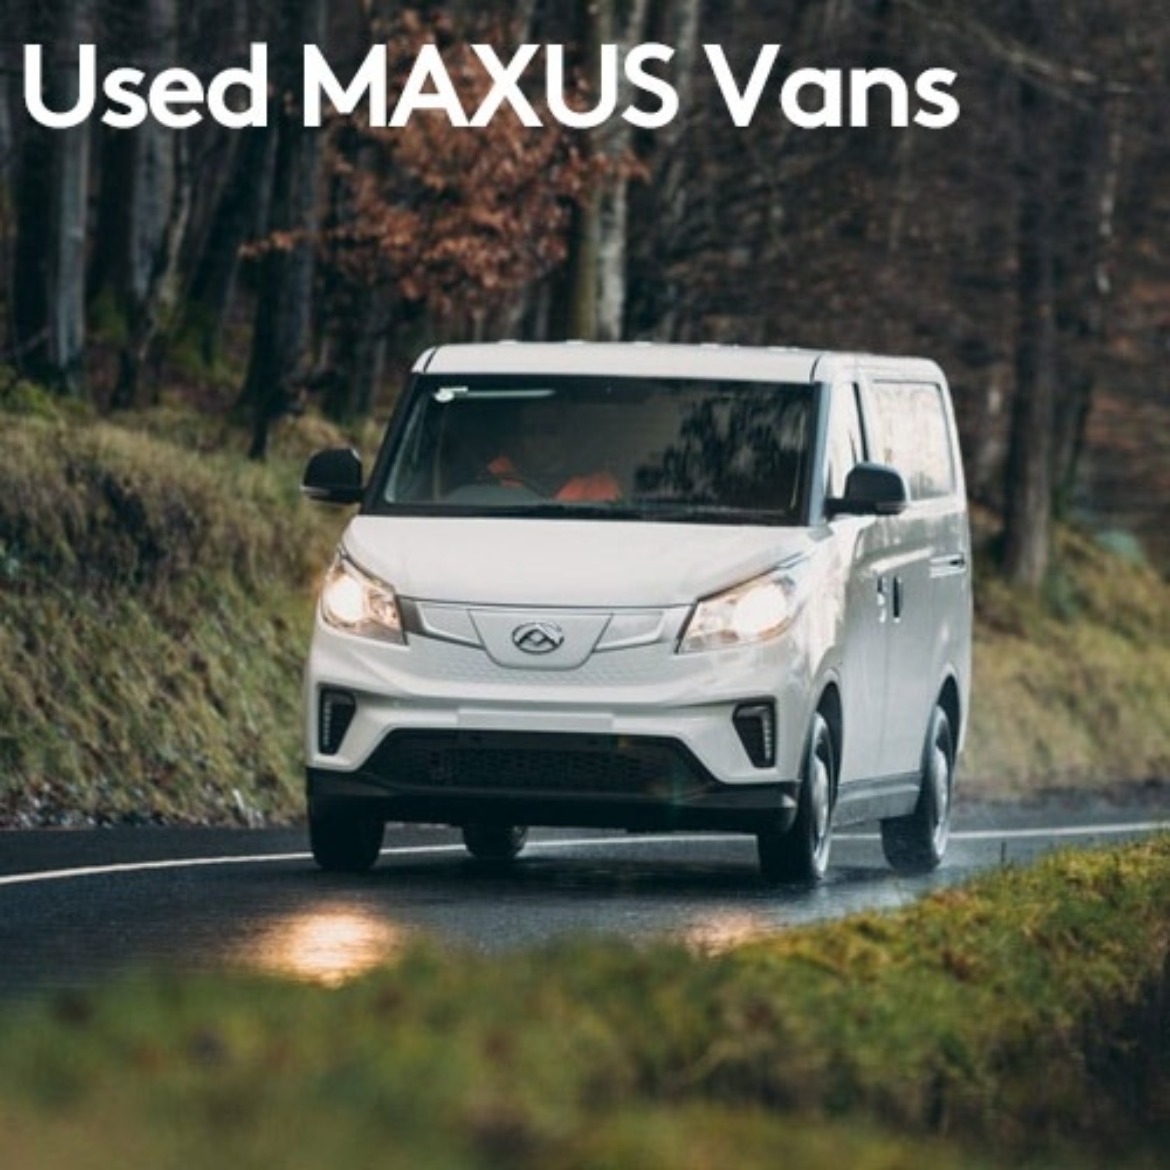 Used Maxus Vans in Louth, Lincolnshire